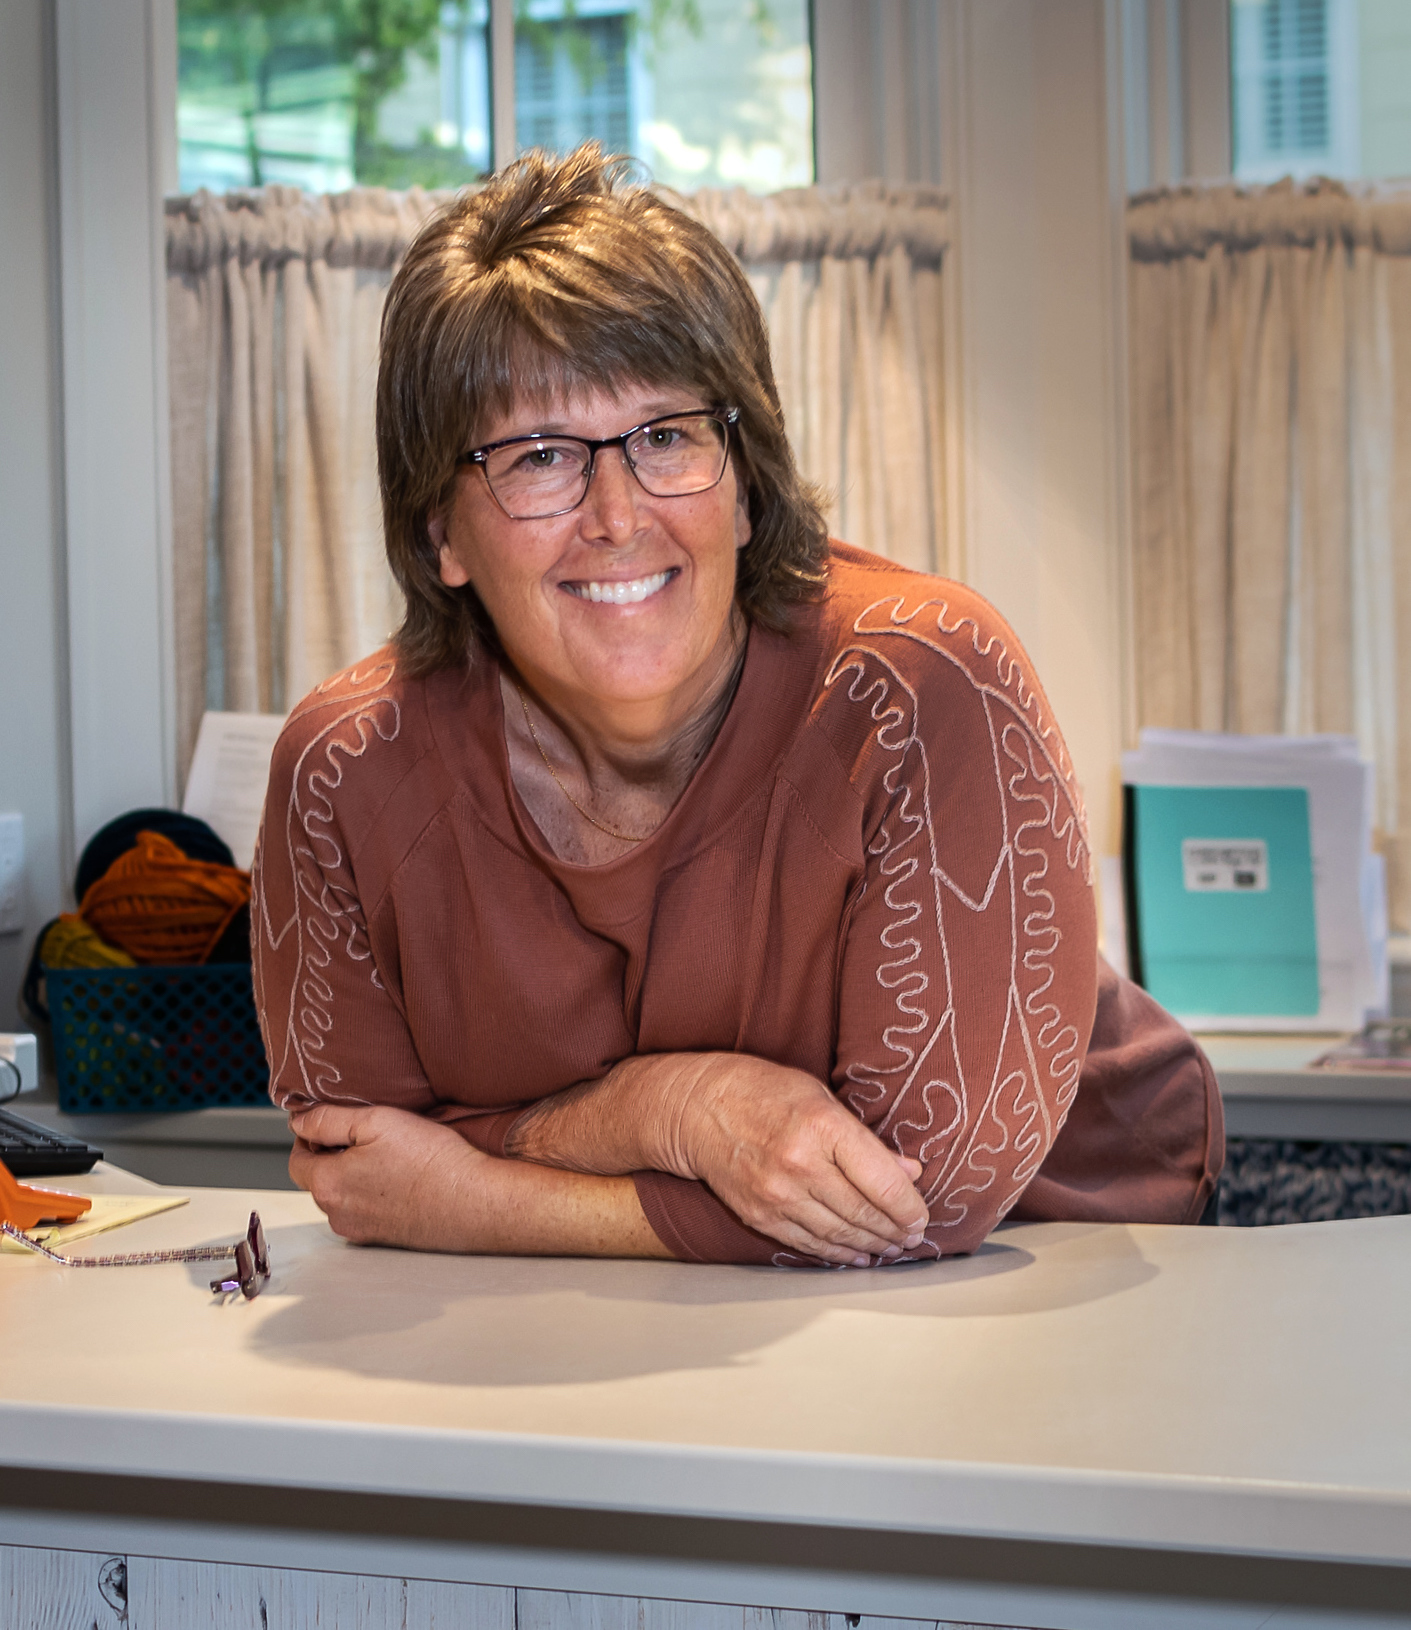 Learn To Crochet class at The Endless Skein